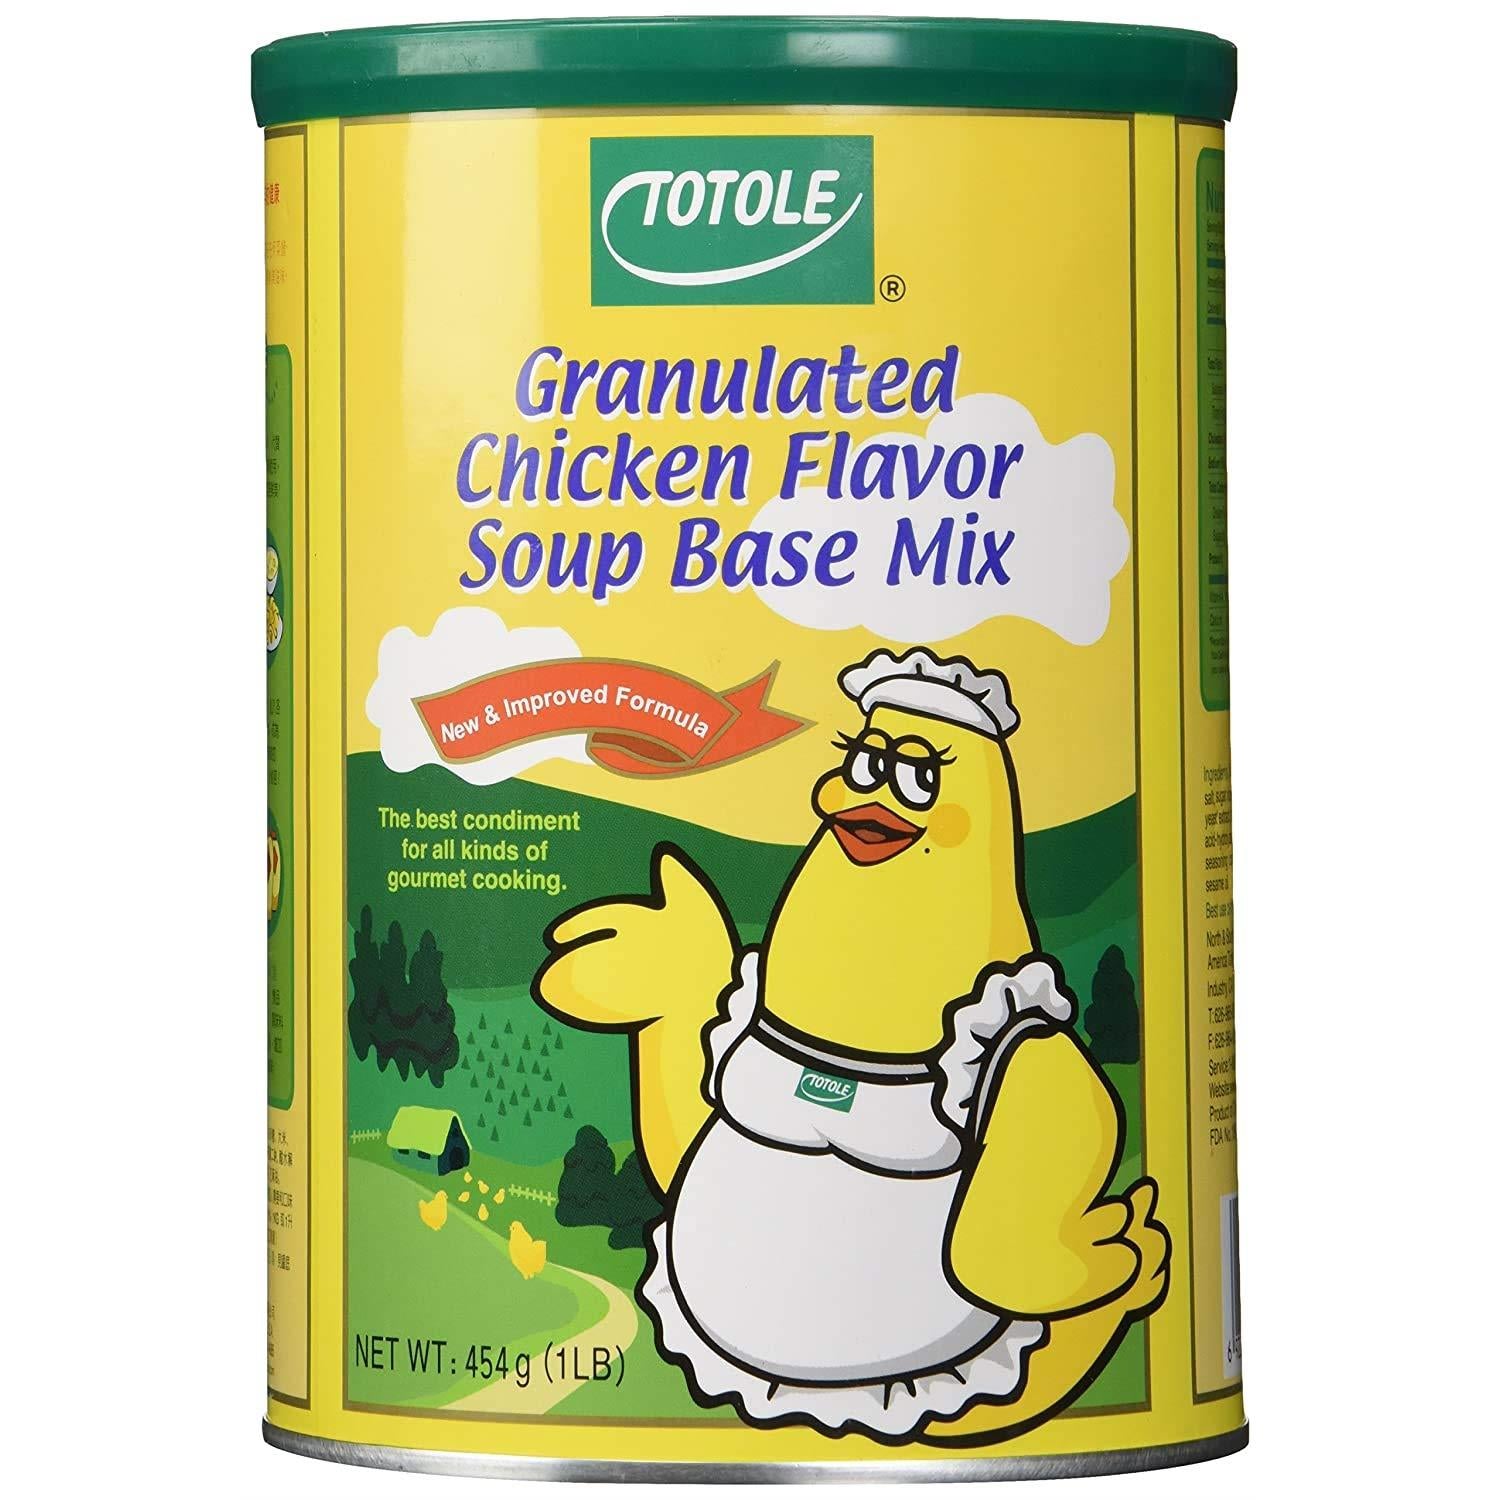 Totole Granulated Chicken Flavor Soup Base Mix, Pack of 2